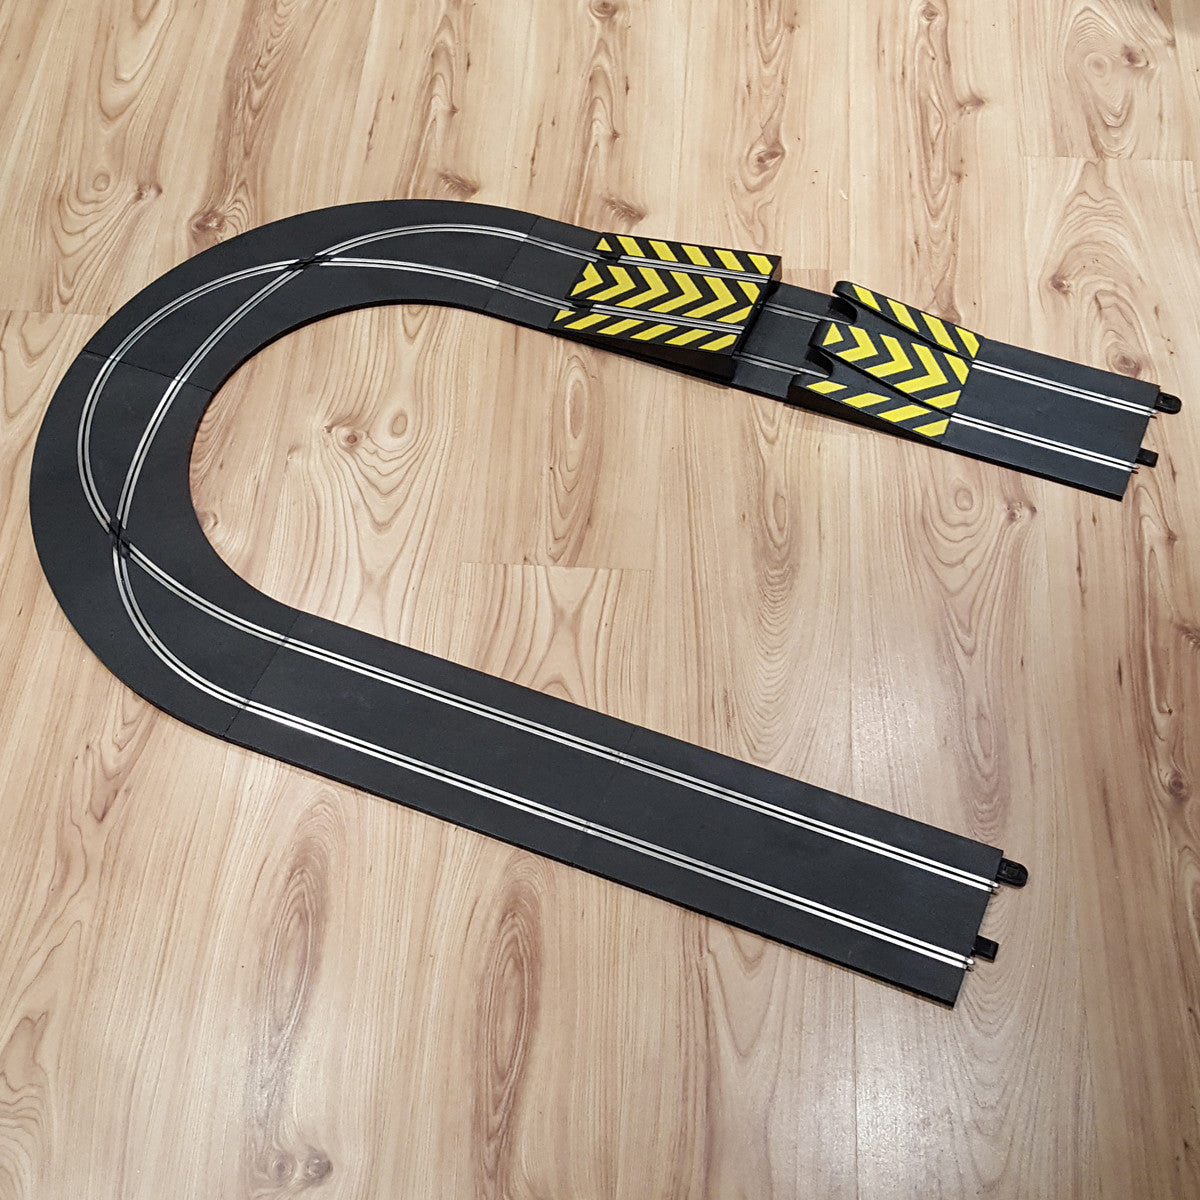 Scalextric Sport Track Extension Crossover Curves Ramp Jump C8211 C8203 C8205